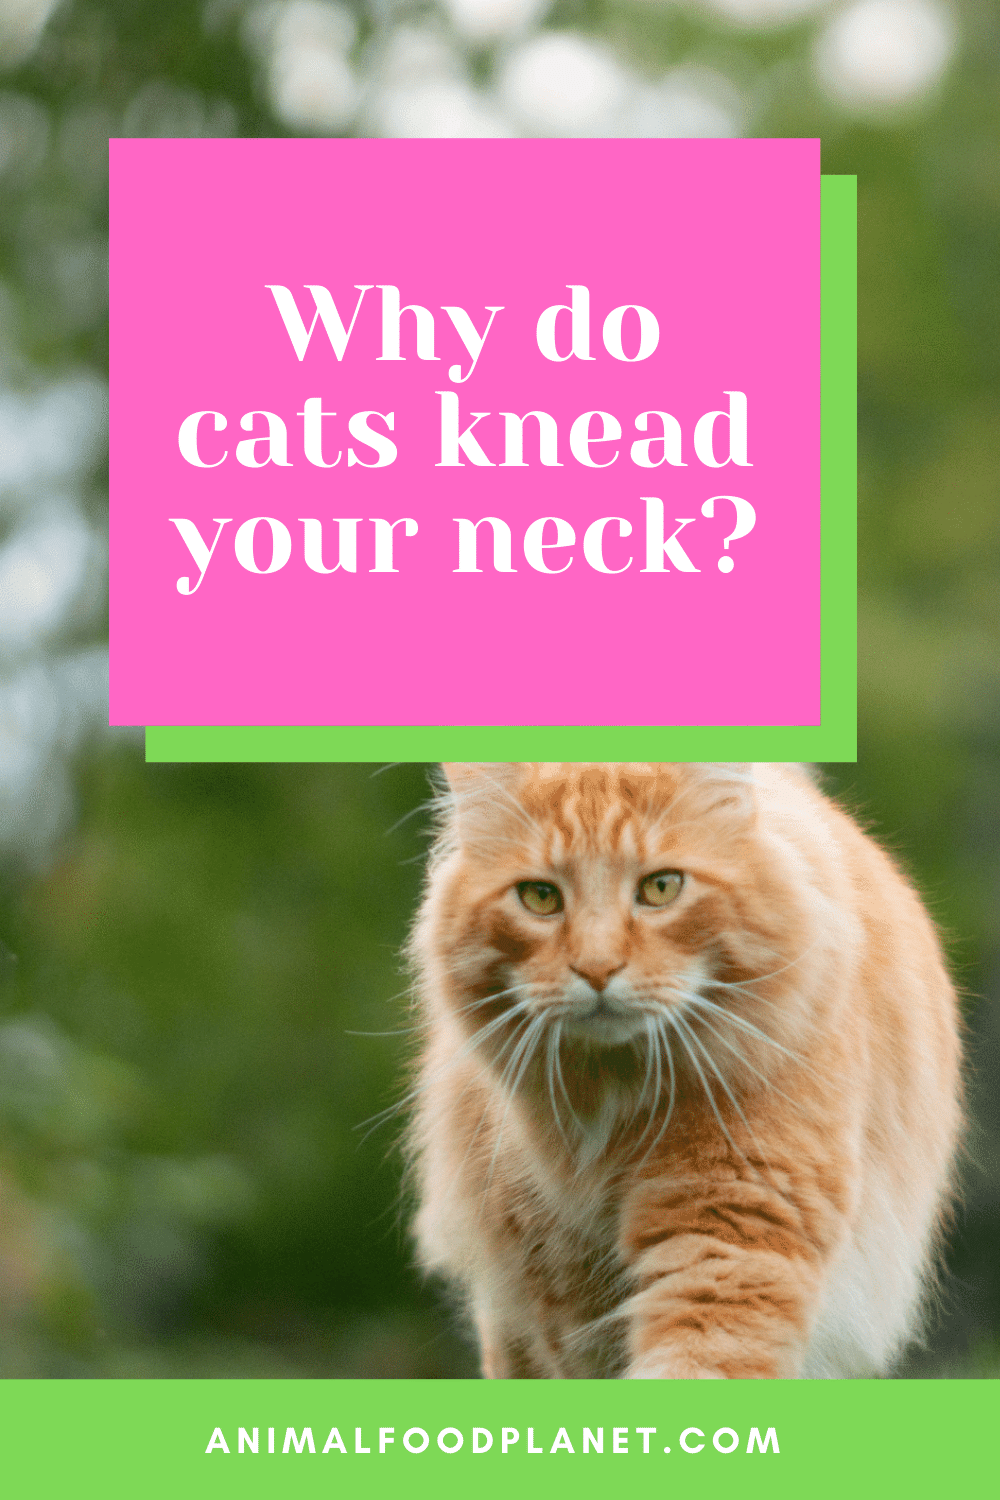 Why Do Cats Knead Your Neck?